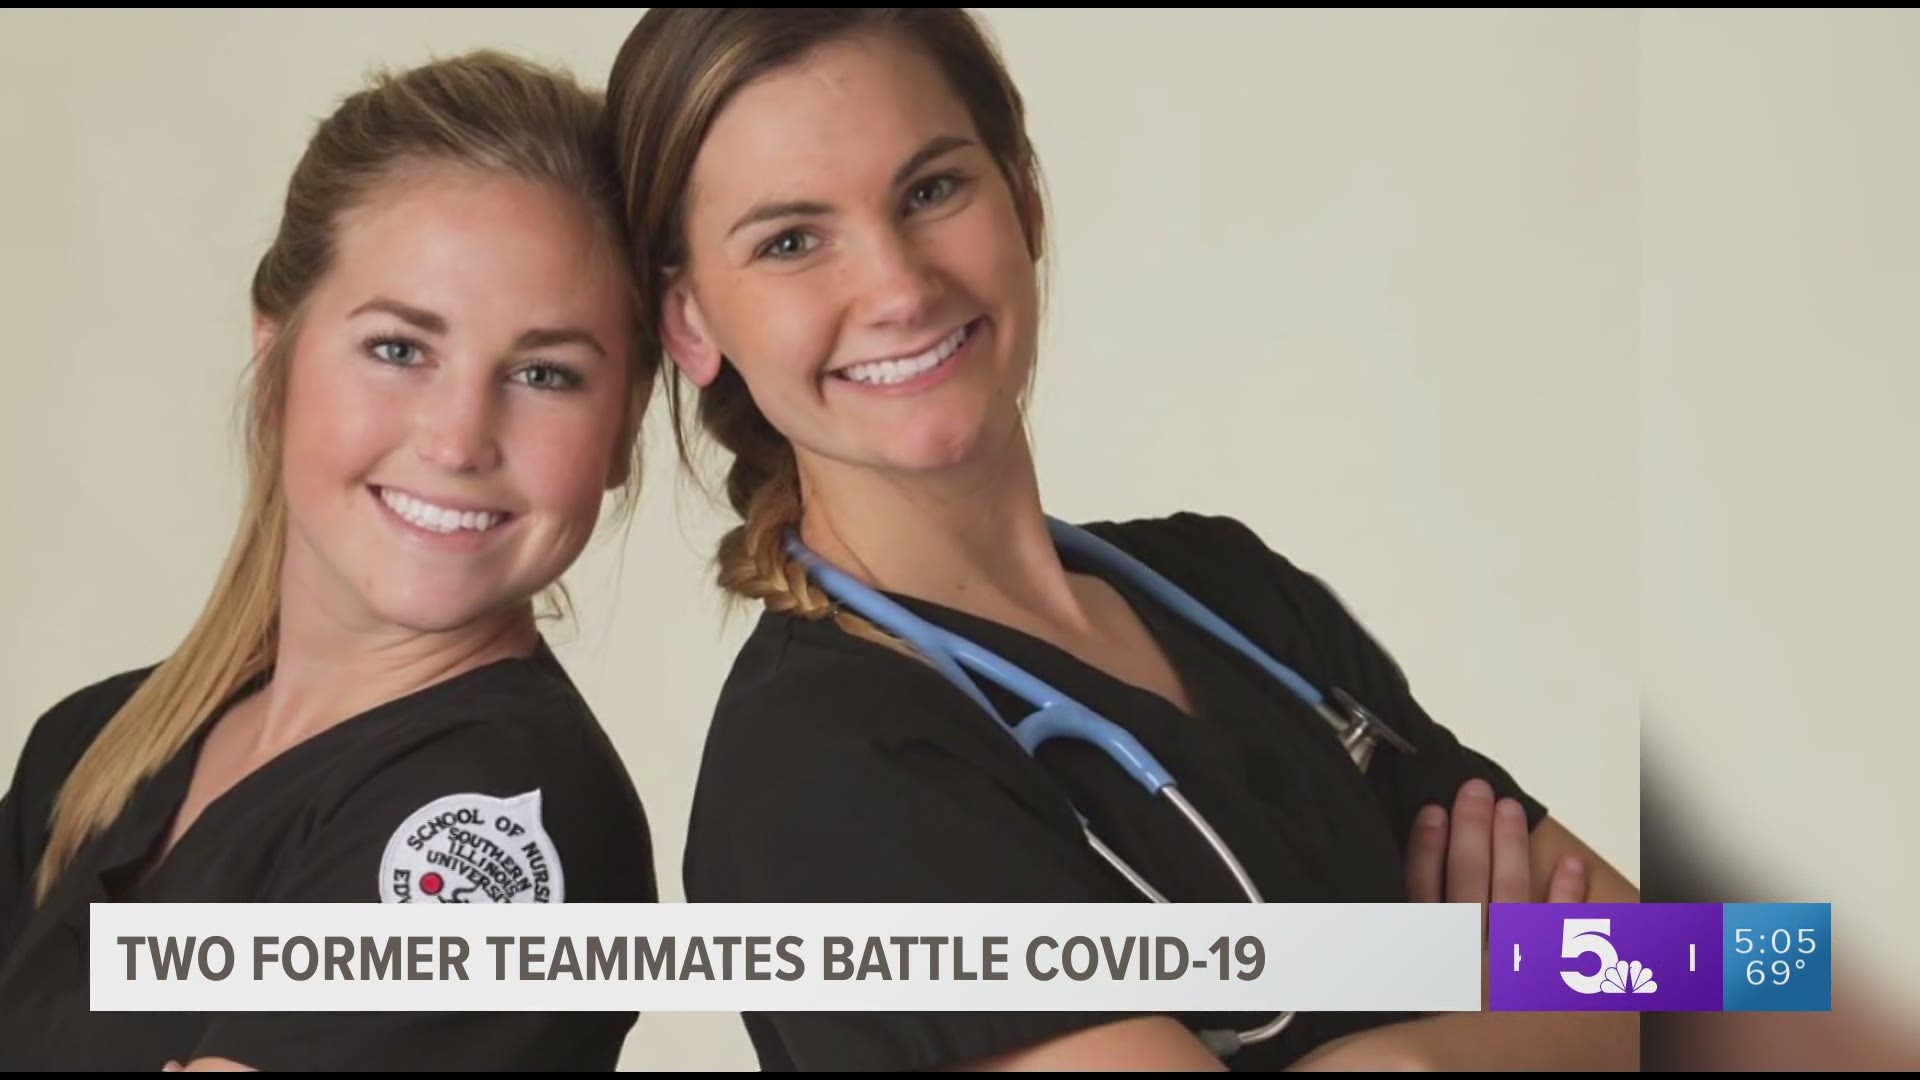 Battle-tested on the soccer field for years, the two are now braving a pandemic as registered nurses two years removed from college